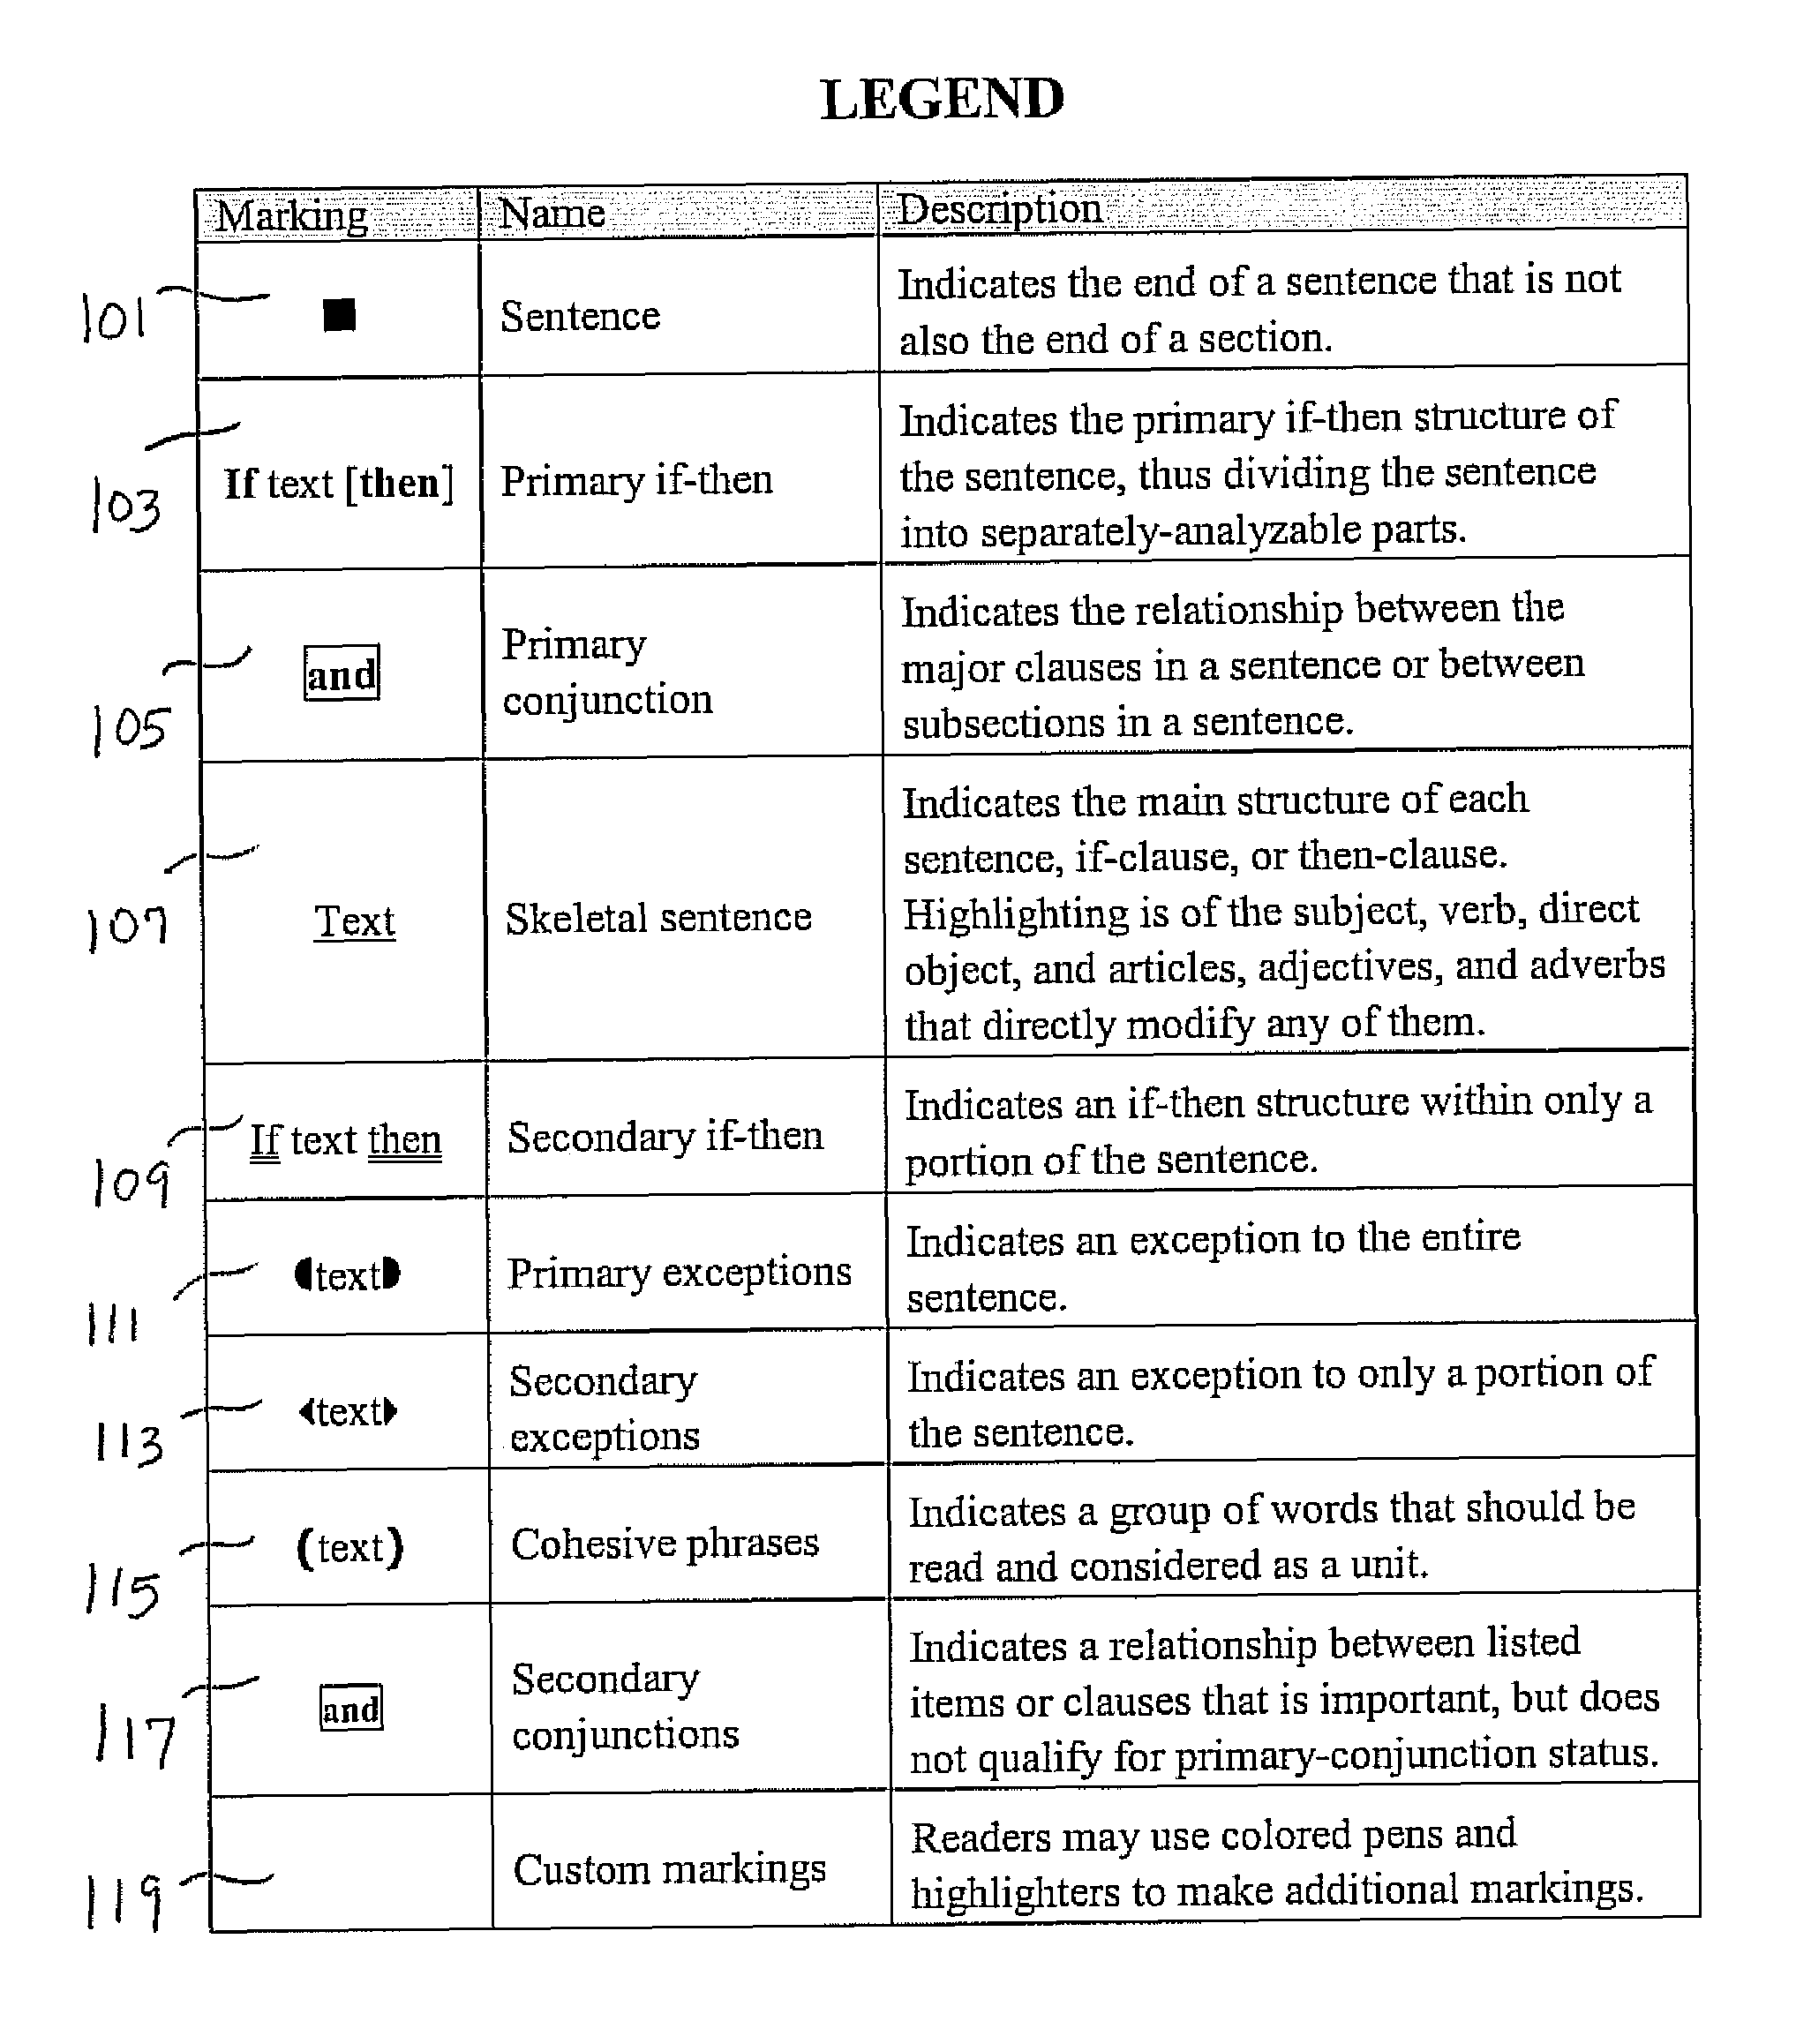 System and method for enhancing comprehension and readability of legal text